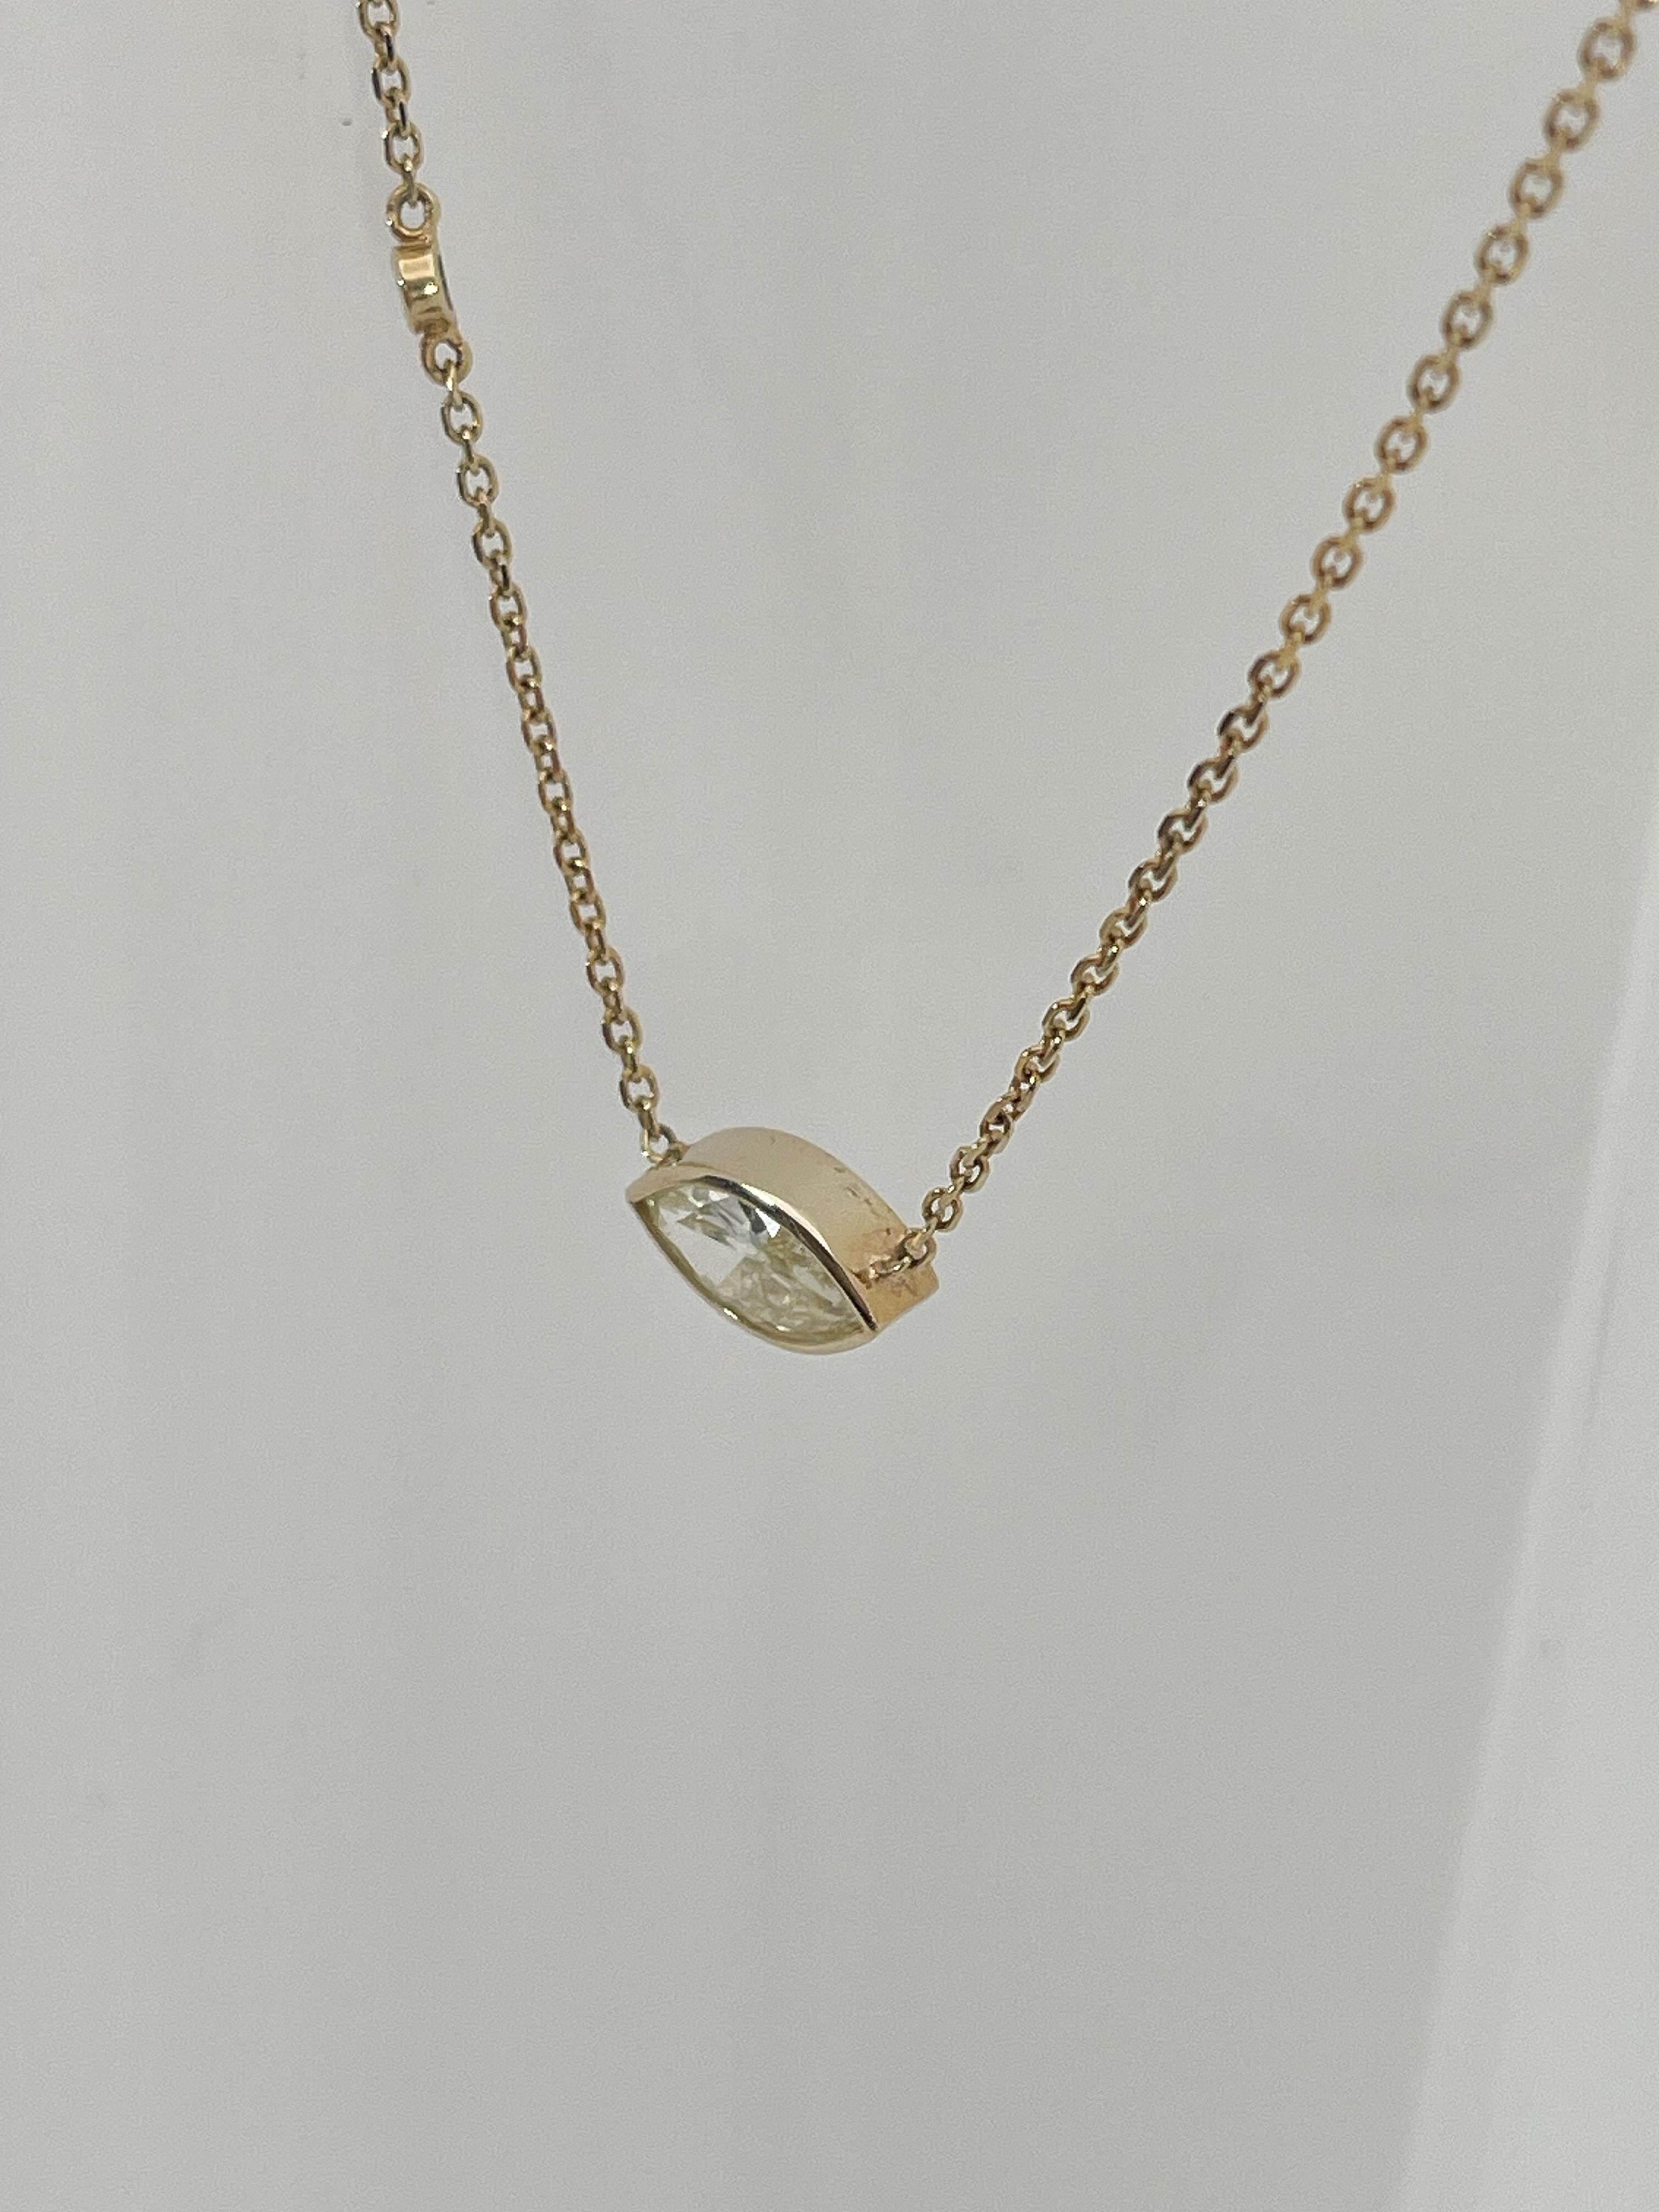 14K Yellow Gold Bezel Set 1.62 CTW Marquise Diamond Necklace In Good Condition For Sale In Stuart, FL